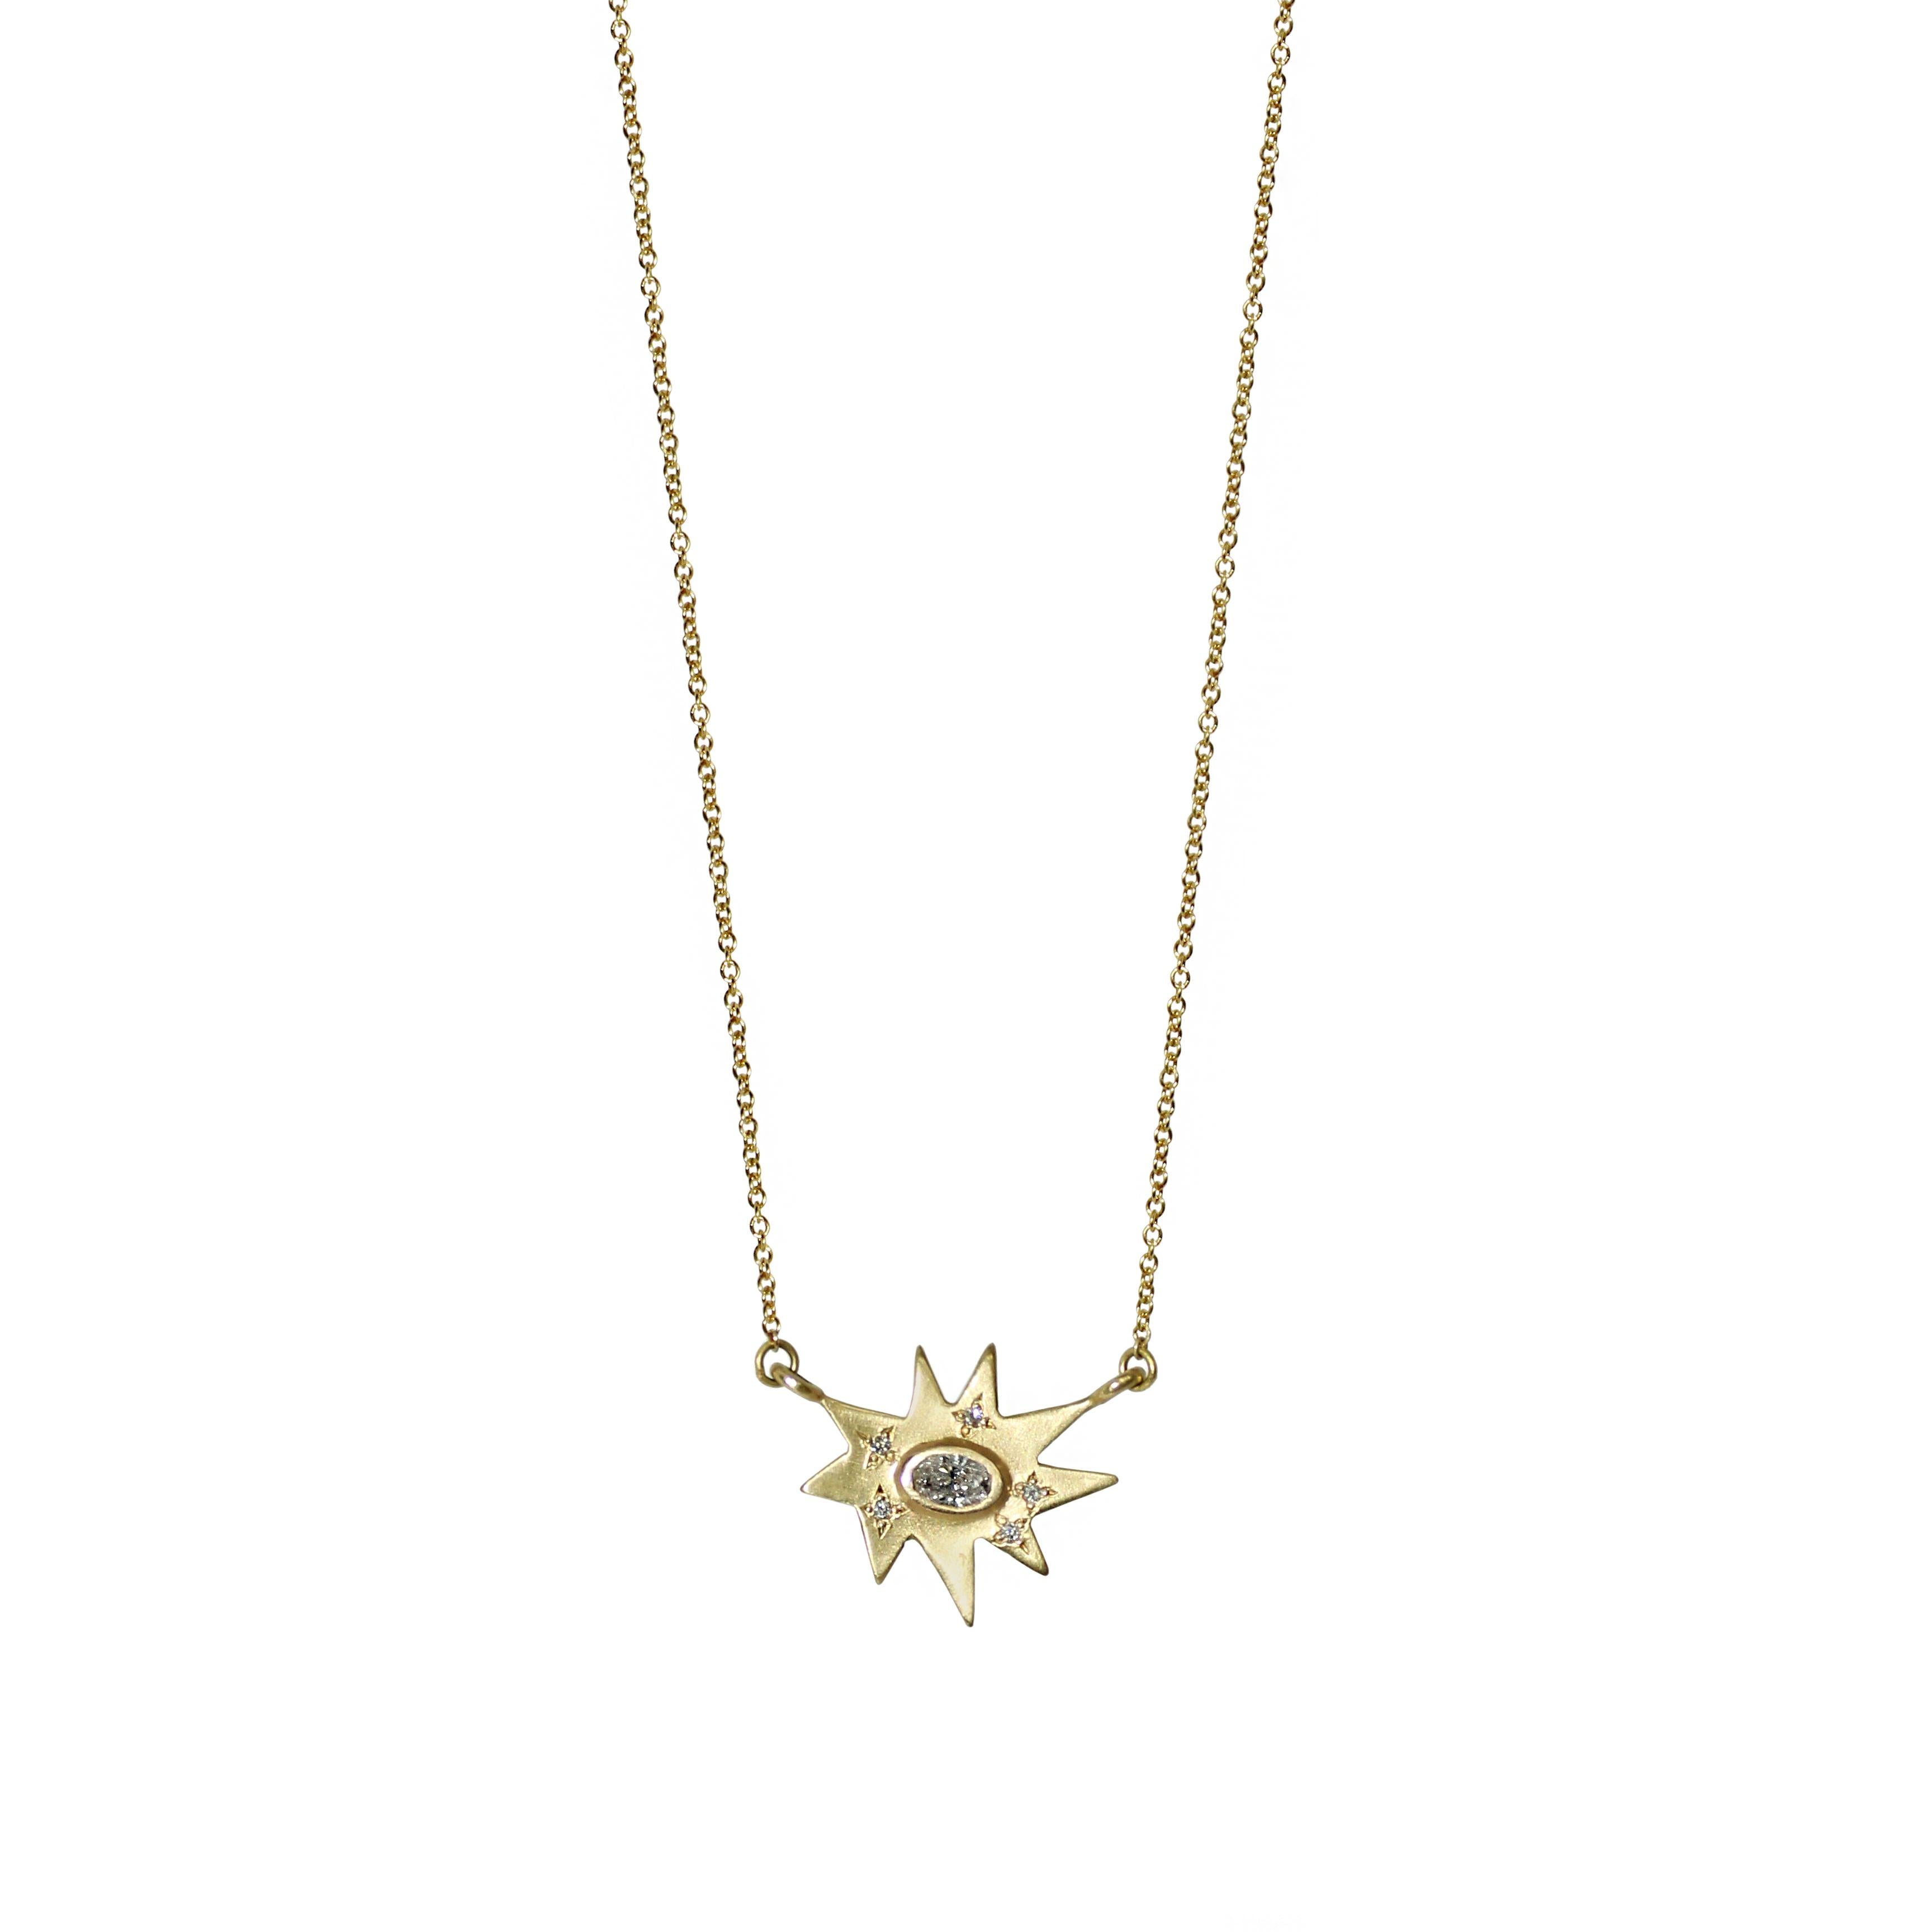 Classic and stunning. Our iconic matte gold Stellina necklace features our signature diamond dusting and a stunning diamond center. Hanging on a delicate gold chain, this piece is made to accent any outfit, and layers perfectly. 
14k matte yellow